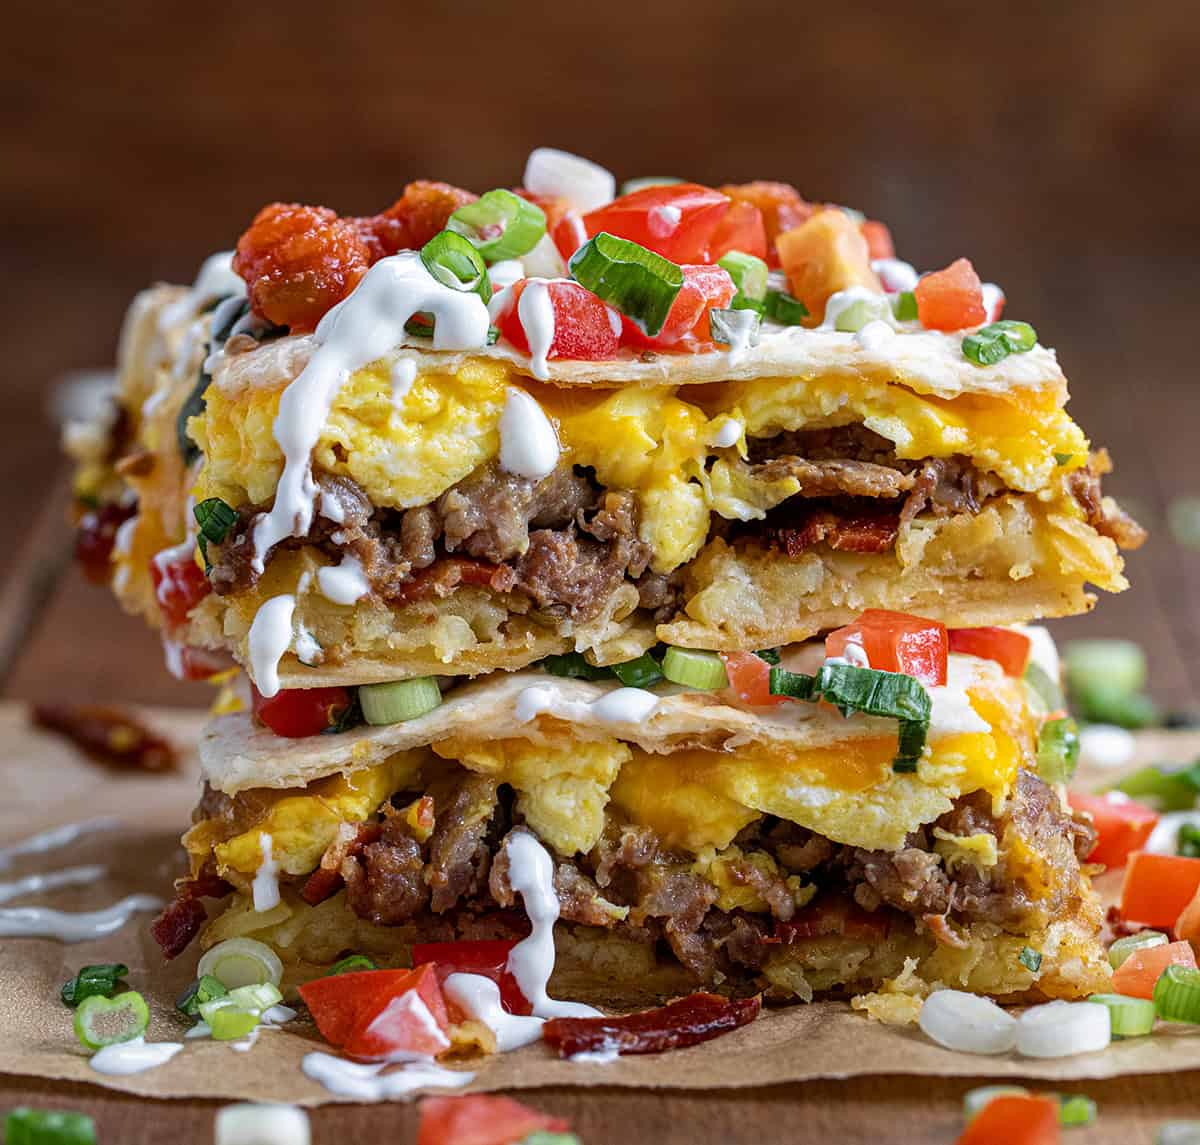 Pieces of a breakfast wrap stacked on itself and showing inside layers of hash brown, egg, bacon, sausage, and tomatoes.